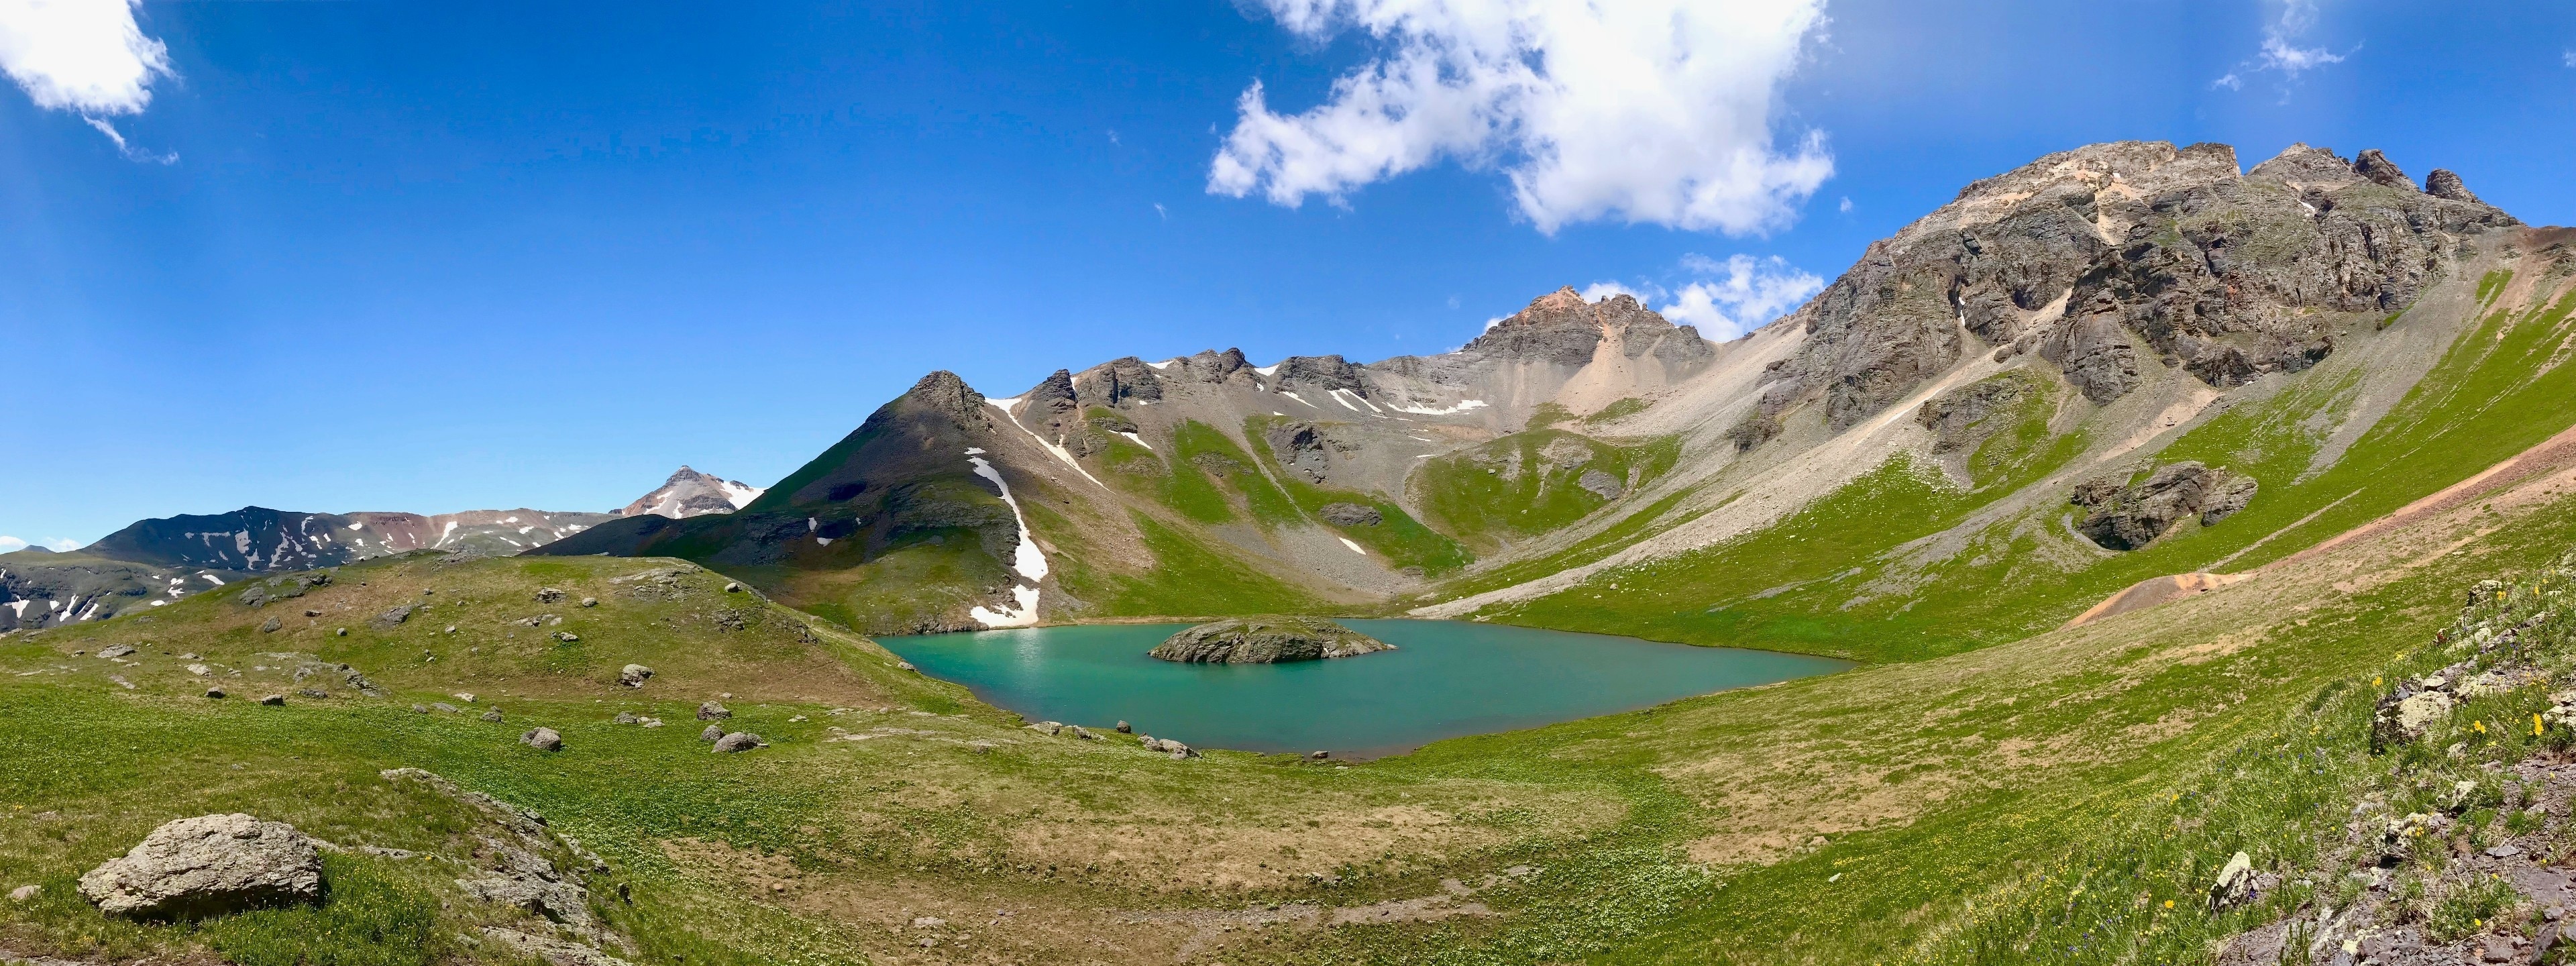 Hidden in the high country above Silverton CO is Island Lake, In a days hike you can see both Island Lake and the Ice Lakes basin, the best views in southwest Colorado. 

#BVSblue